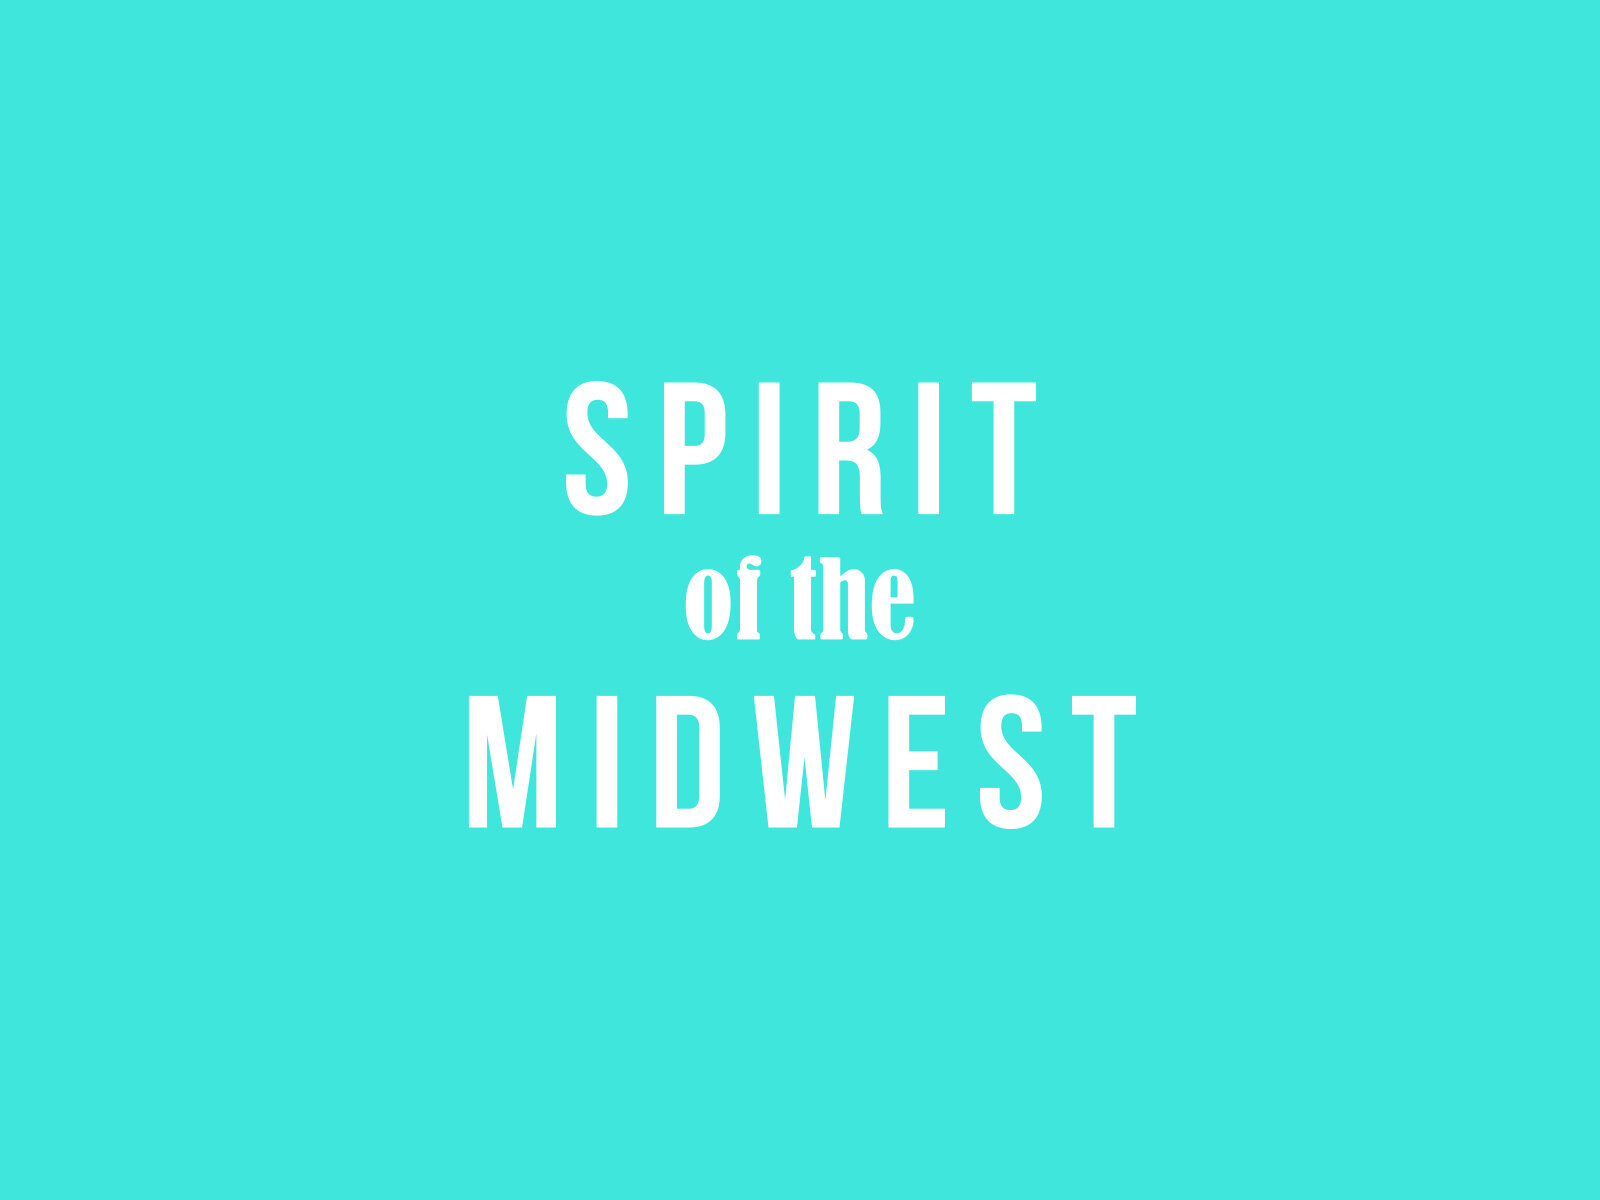 Spirit of the Midwest